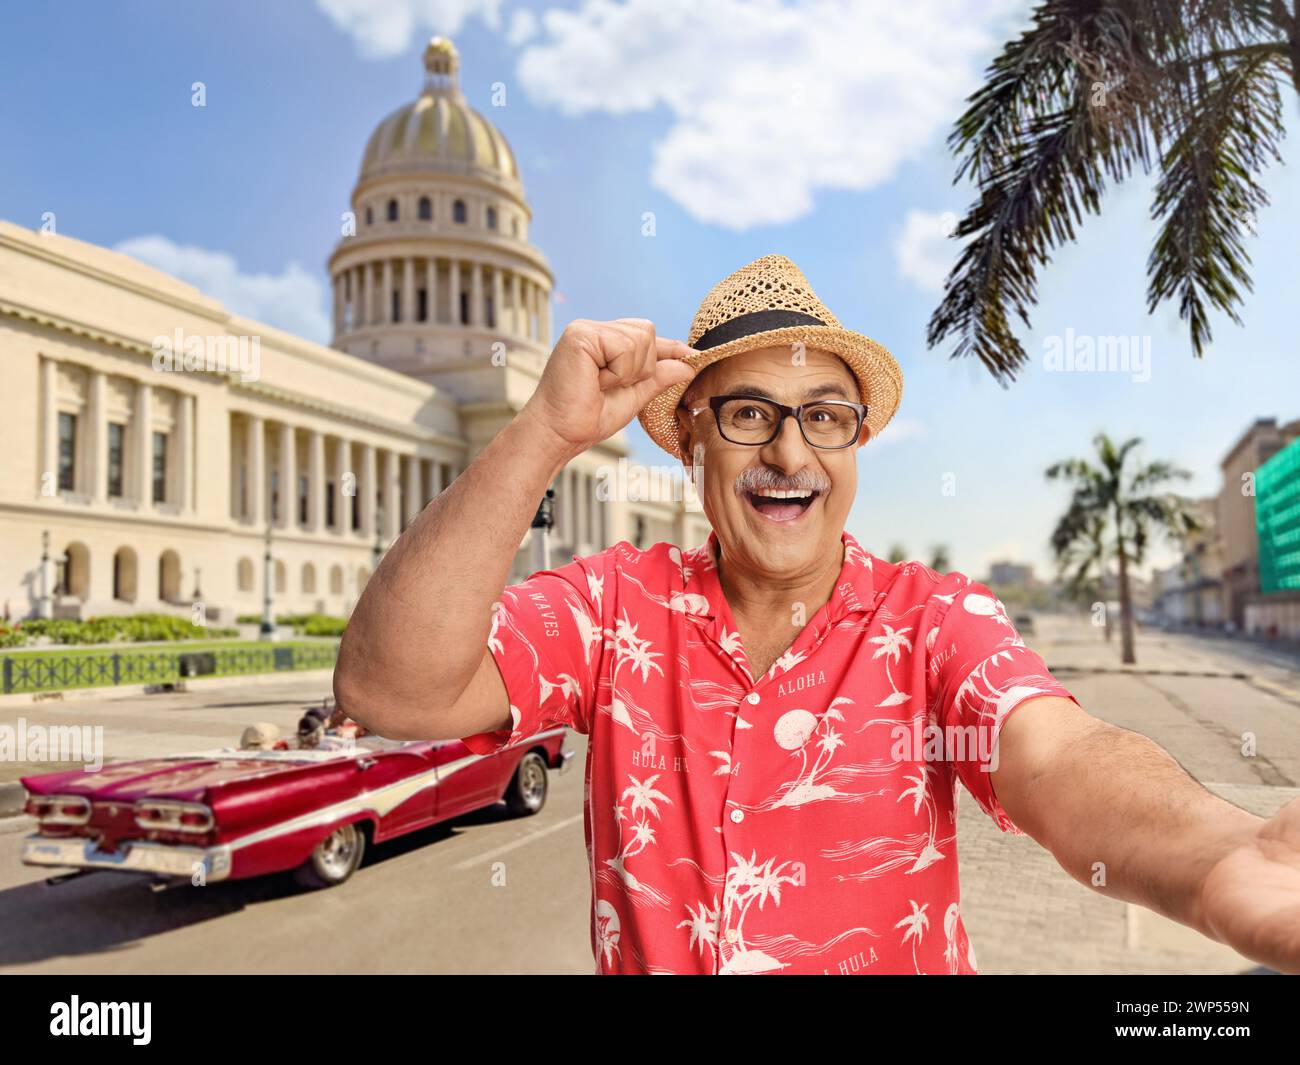 Happy mature tourist with a straw hat taking a selfie on the streets of Havana, Cuba Stock Photo